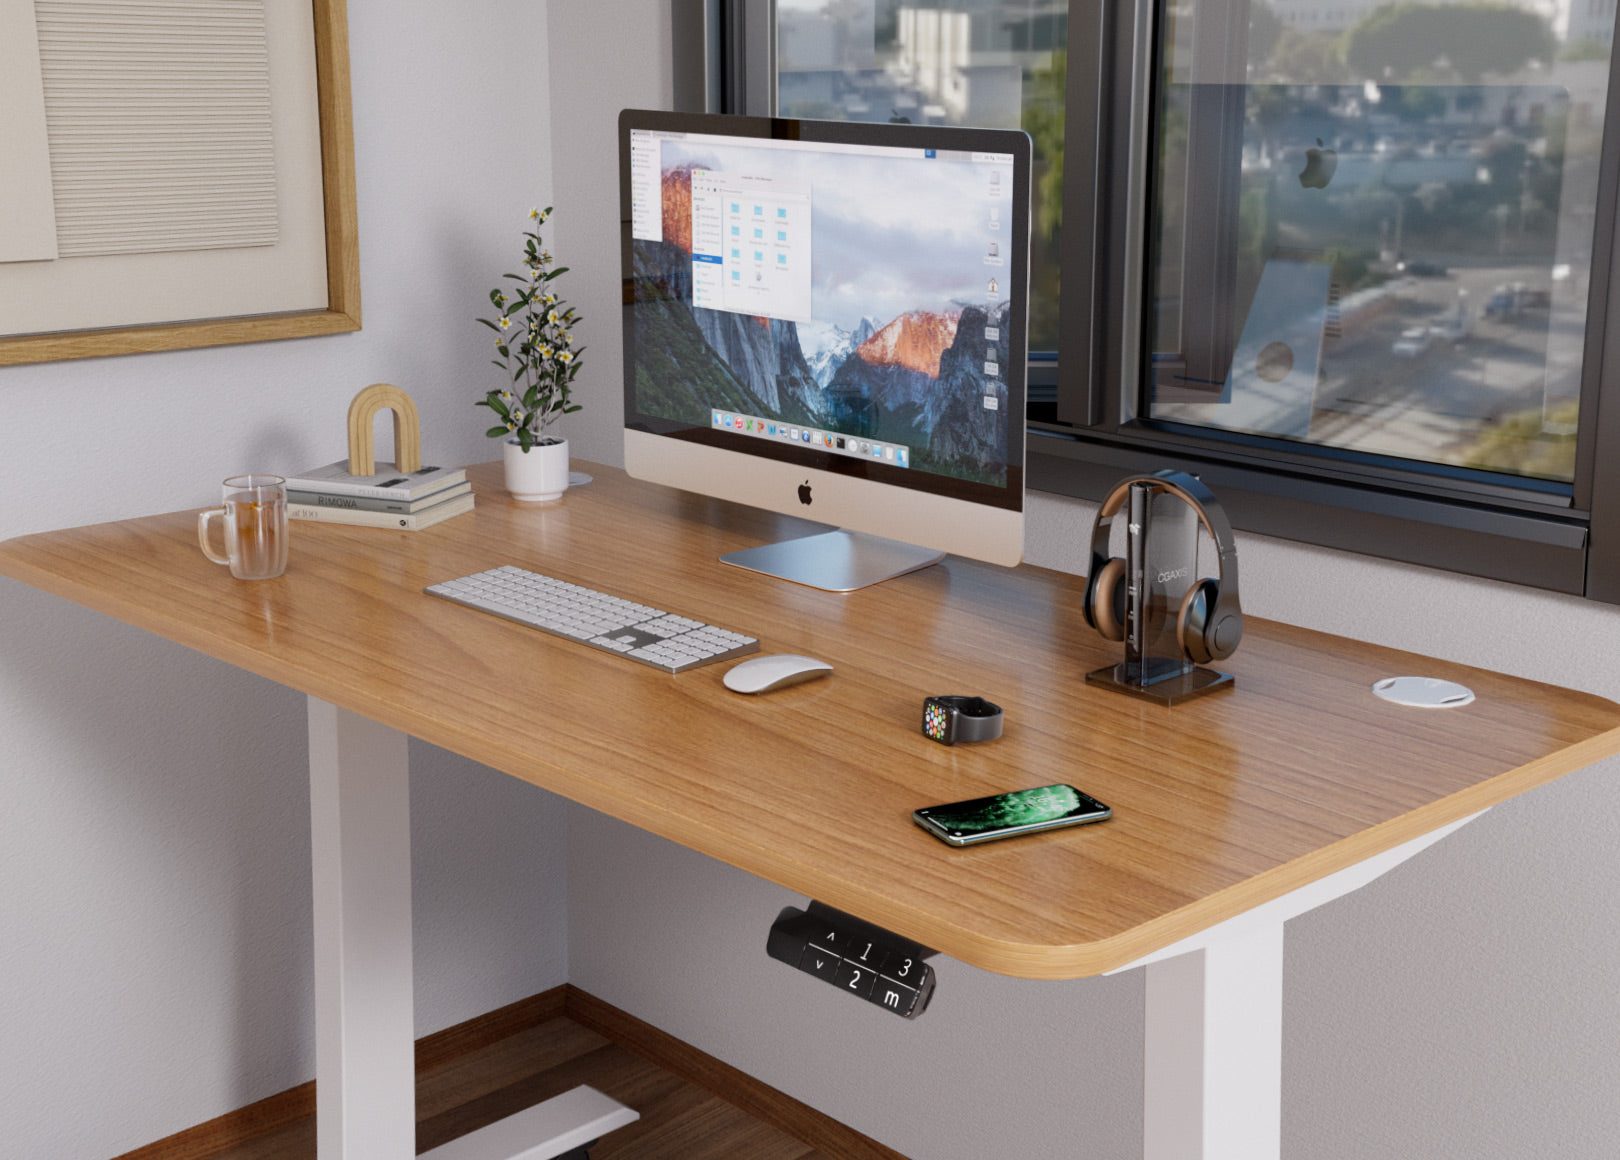 Transform your home office into a comfortable and productive workspace with our Sunaofe Tau2 standing desk. Our versatile desk is designed with dual motors and adjustable height settings to help you find the perfect working position. This scenario photo showcases the desk in a stylish home office setting, complete with natural light and ergonomic accessories. Order now and experience the benefits of a healthier and more efficient workday!